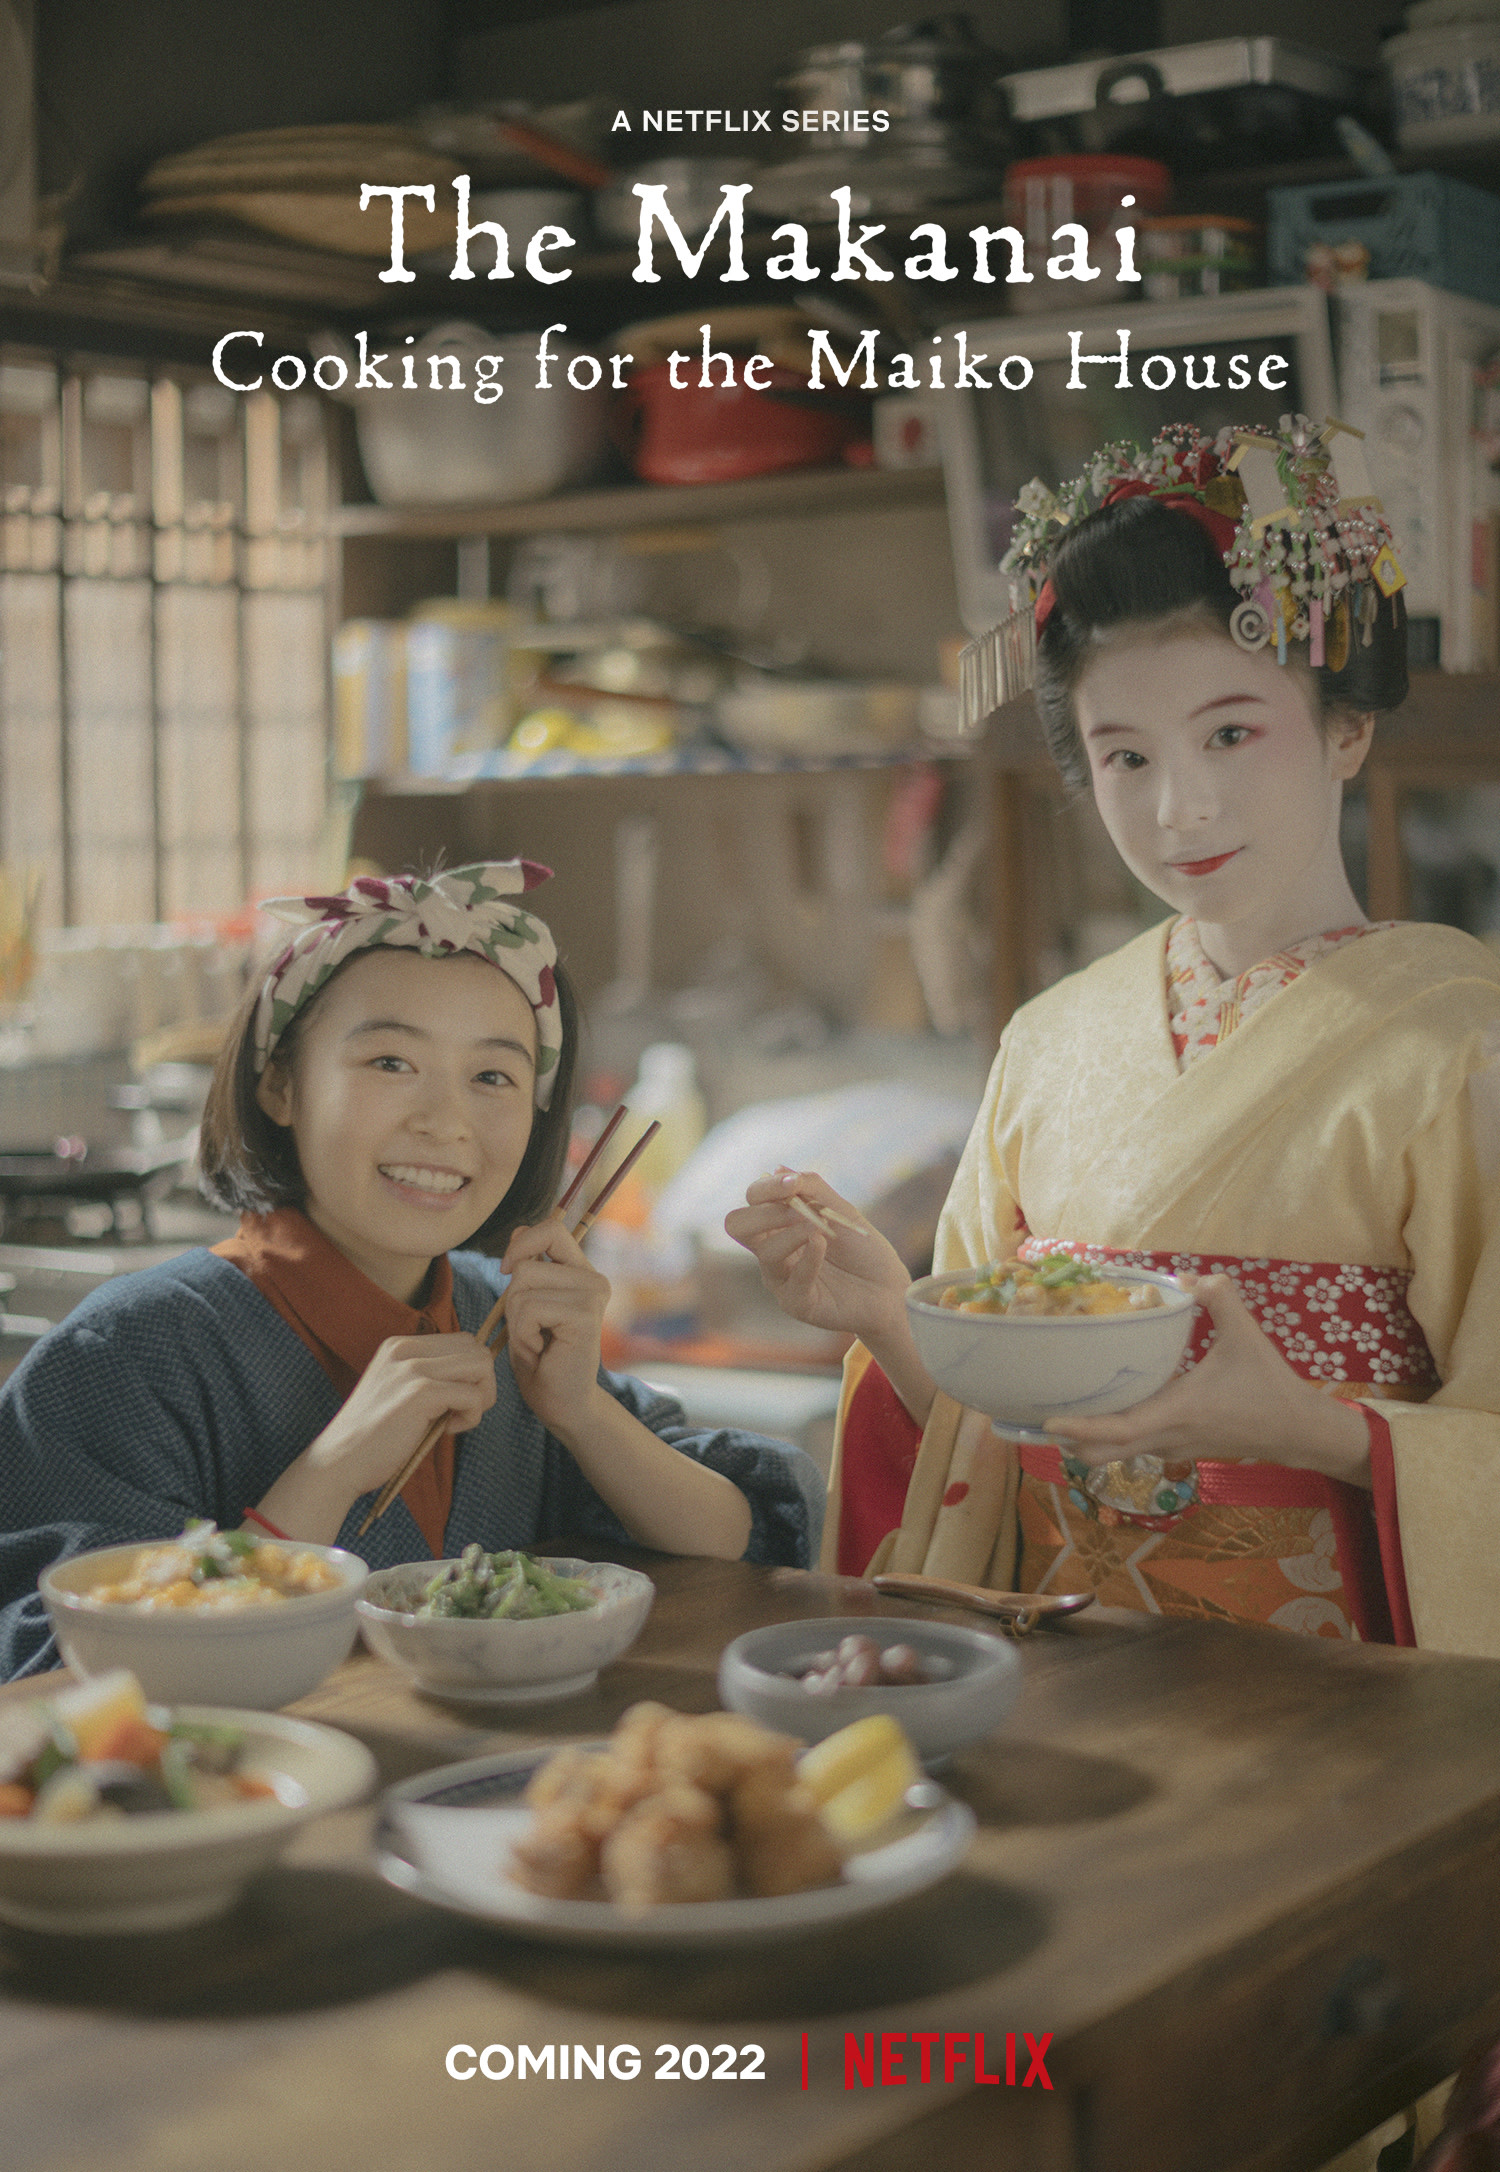 Netflix Announces LiveAction ‘The Makanai Cooking for the Maiko House’